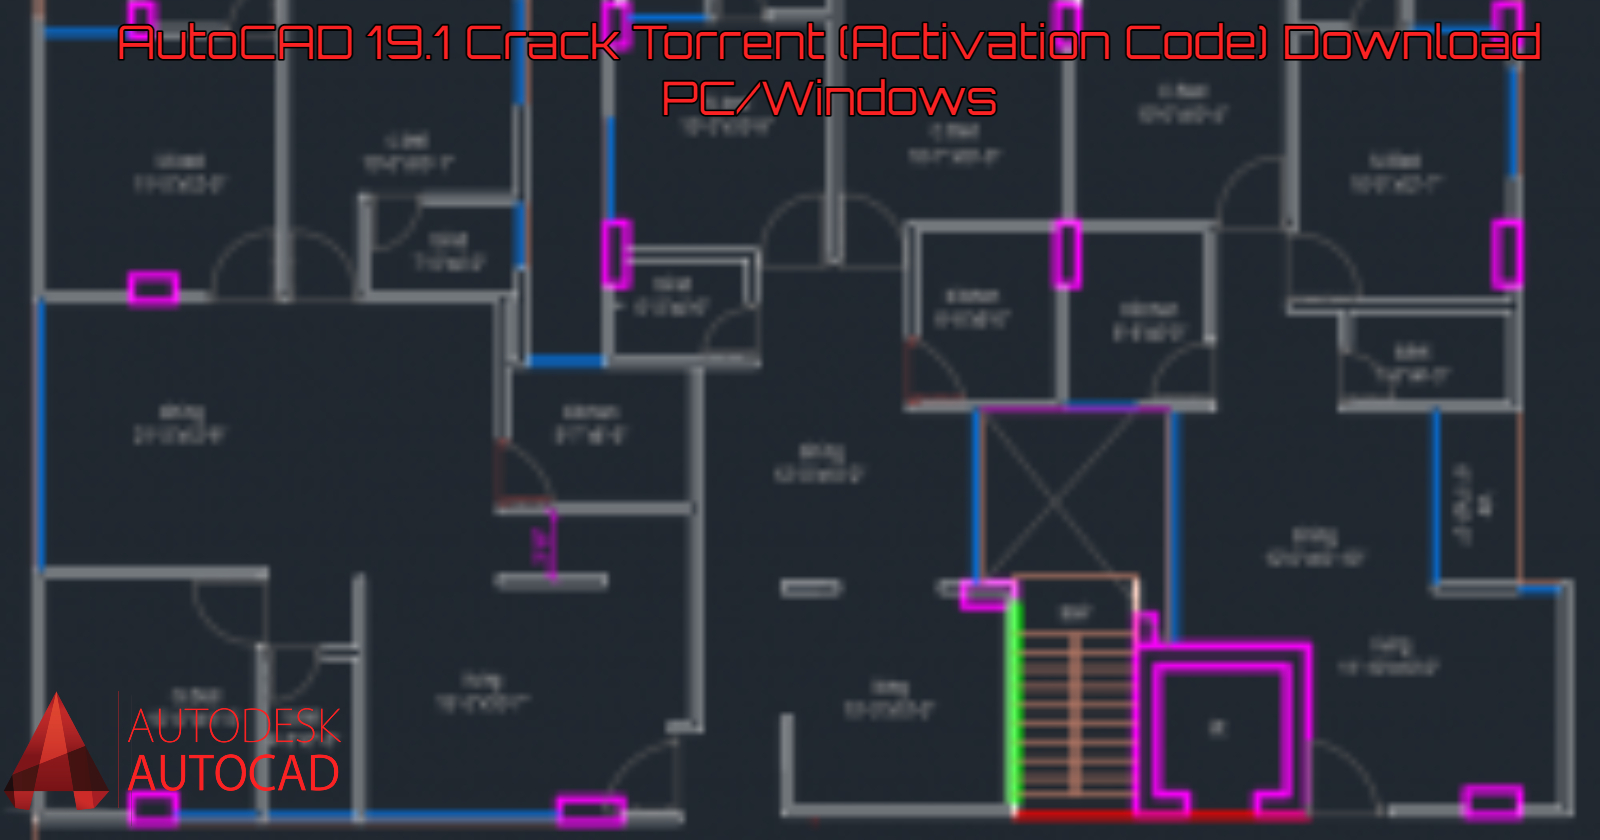 You are currently viewing AutoCAD 19.1 Crack Torrent (Activation Code) Download PC/Windows